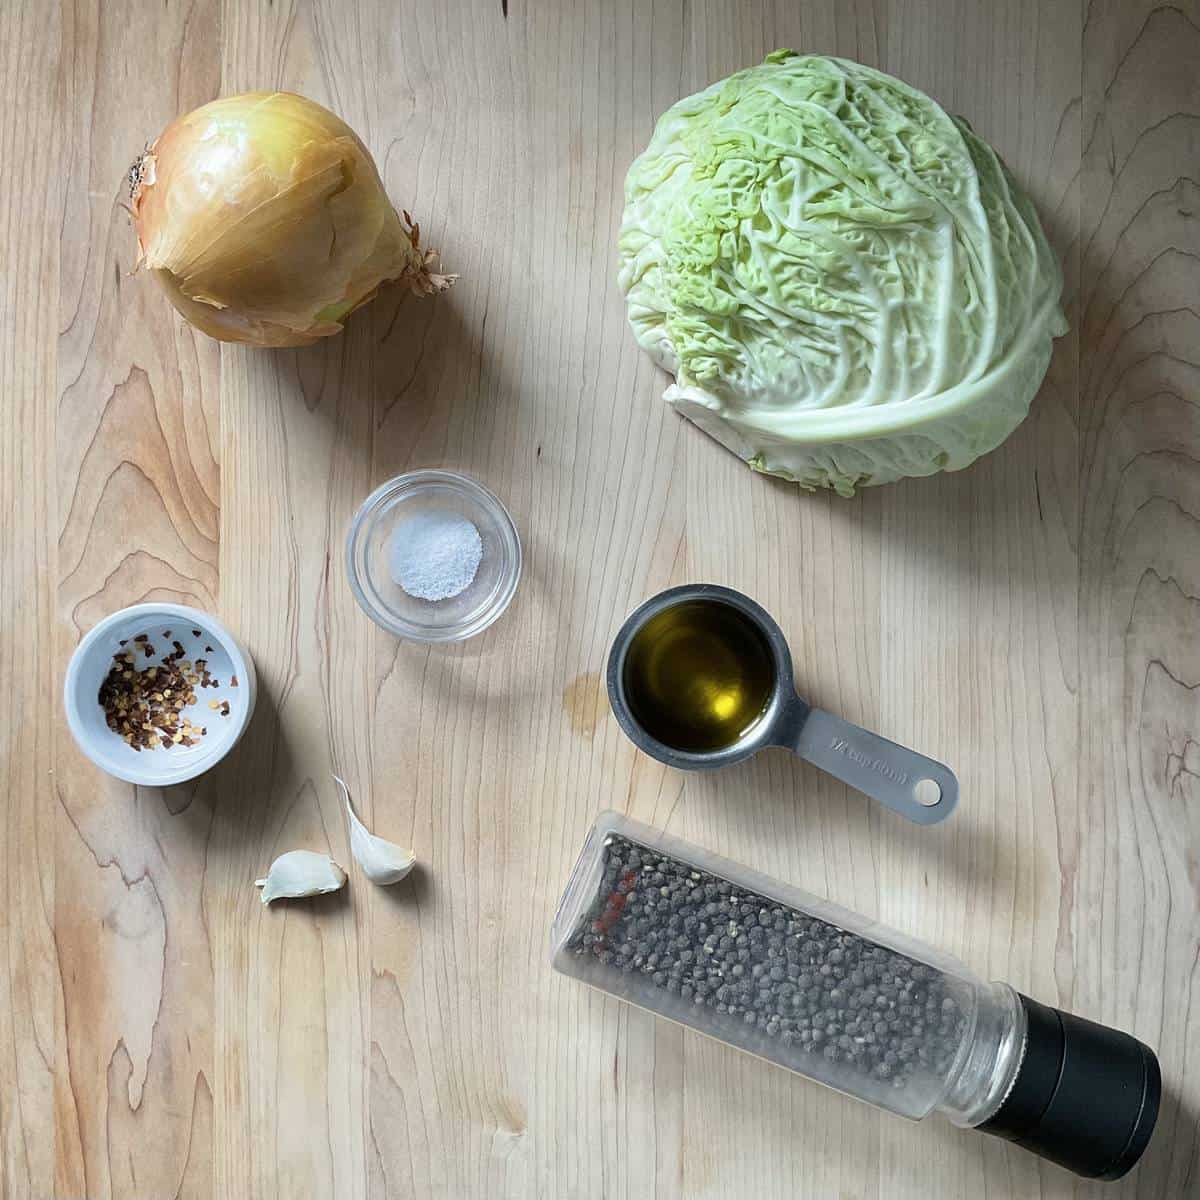 Ingredients to make a sauteed cabbage recipe.